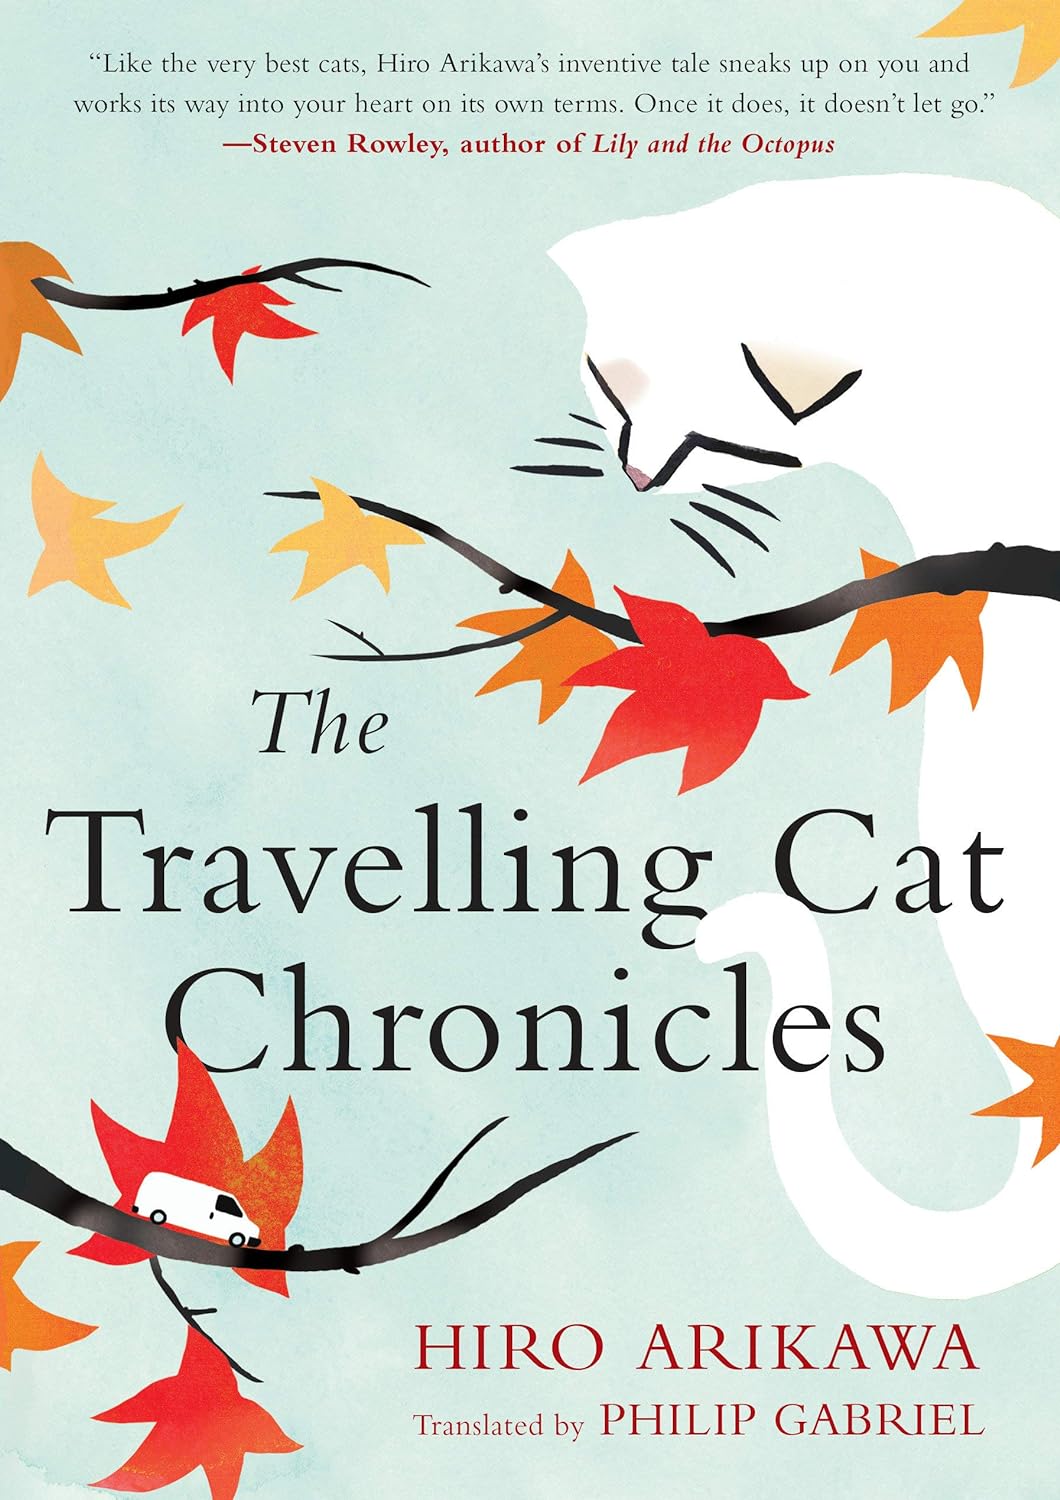 Book cover shows a white cat behind autumn leaves